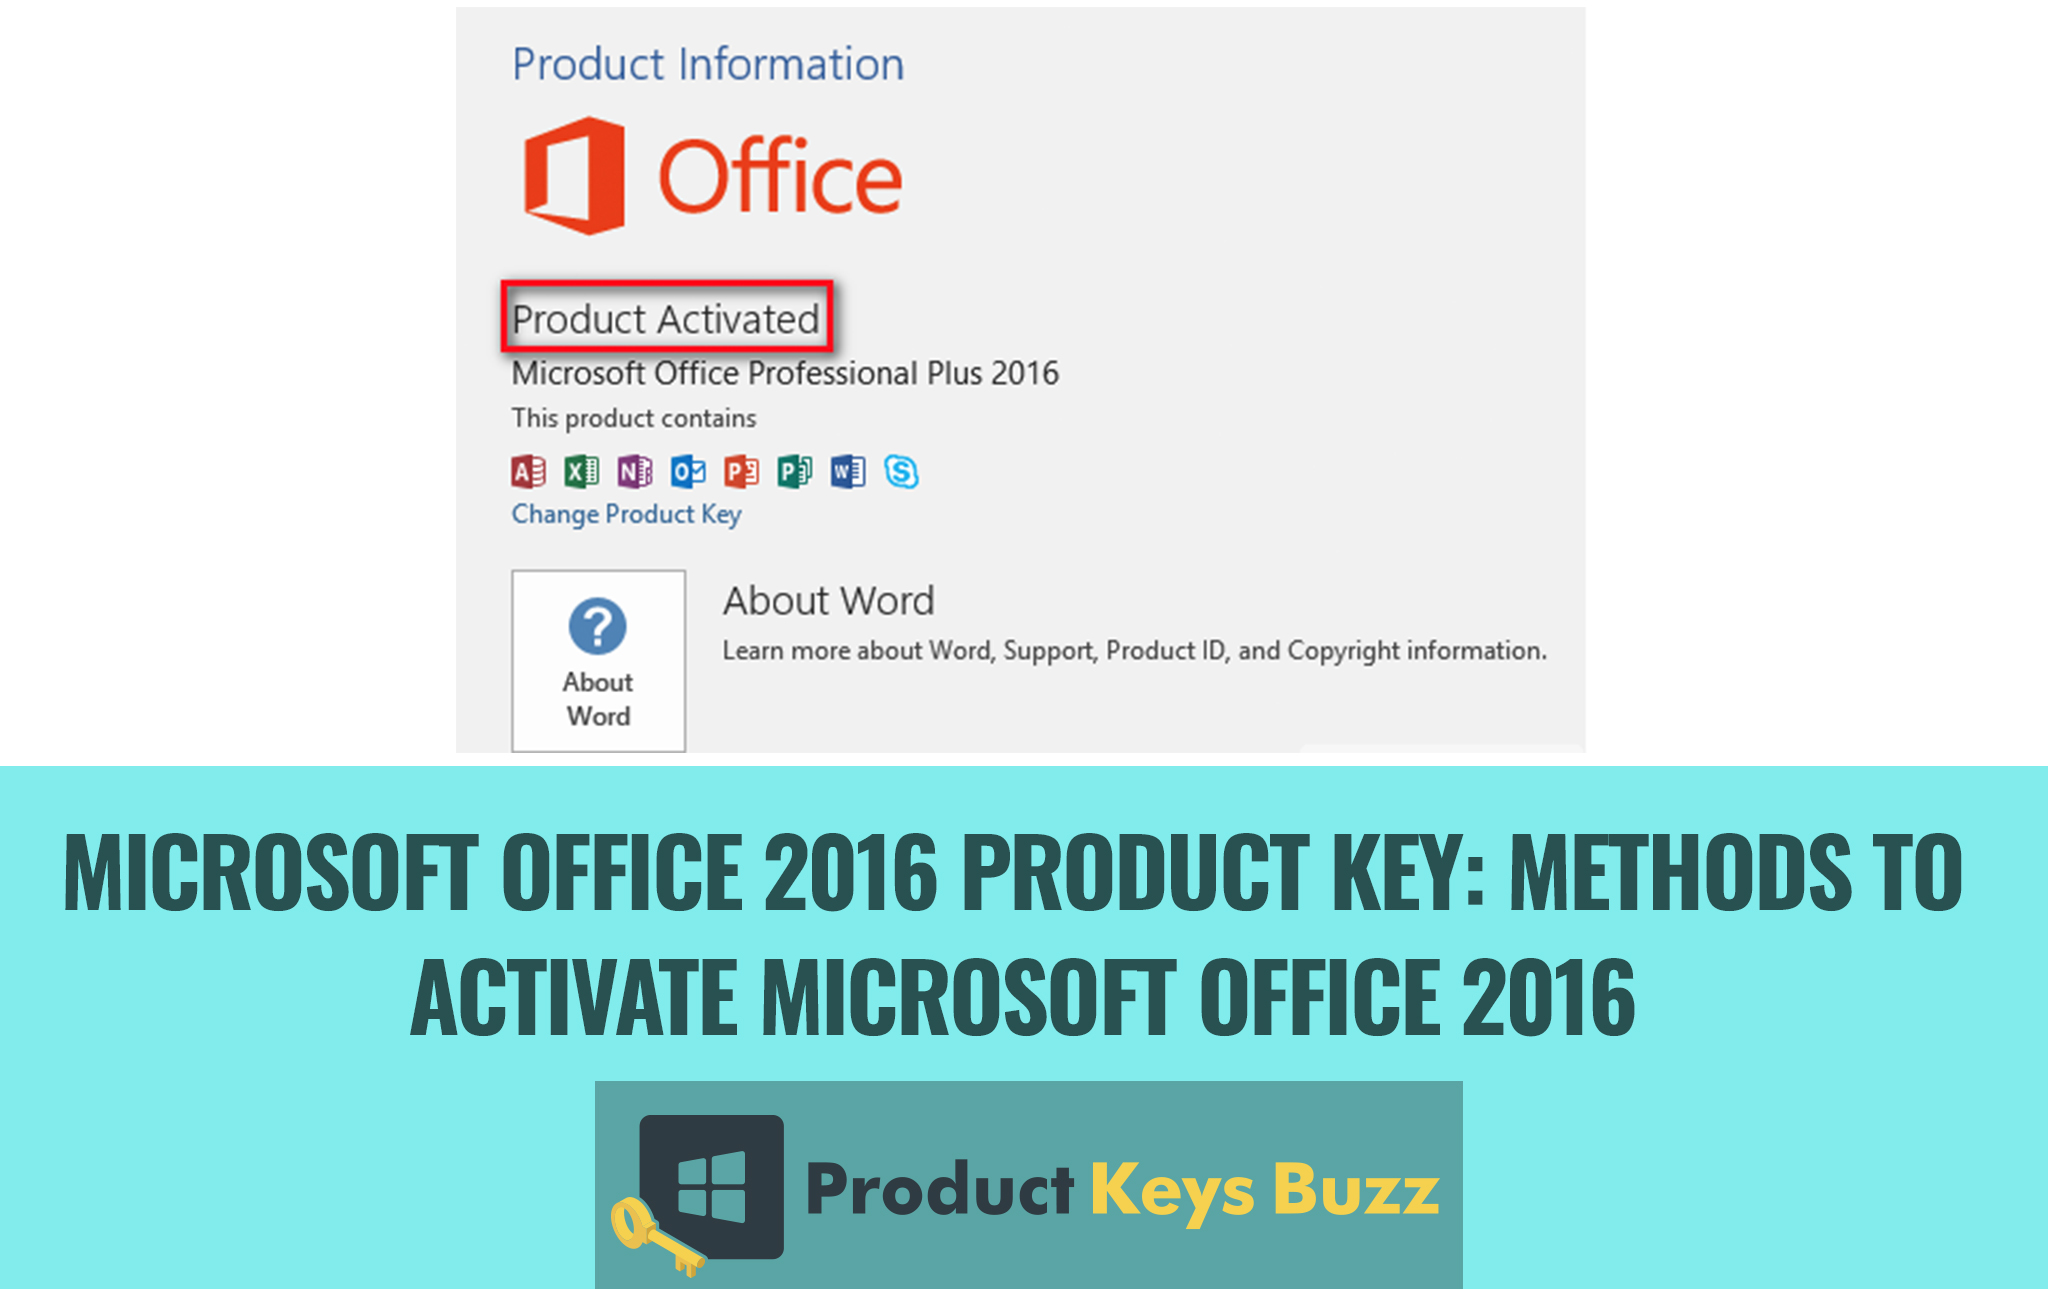 ms office product key for windows 10